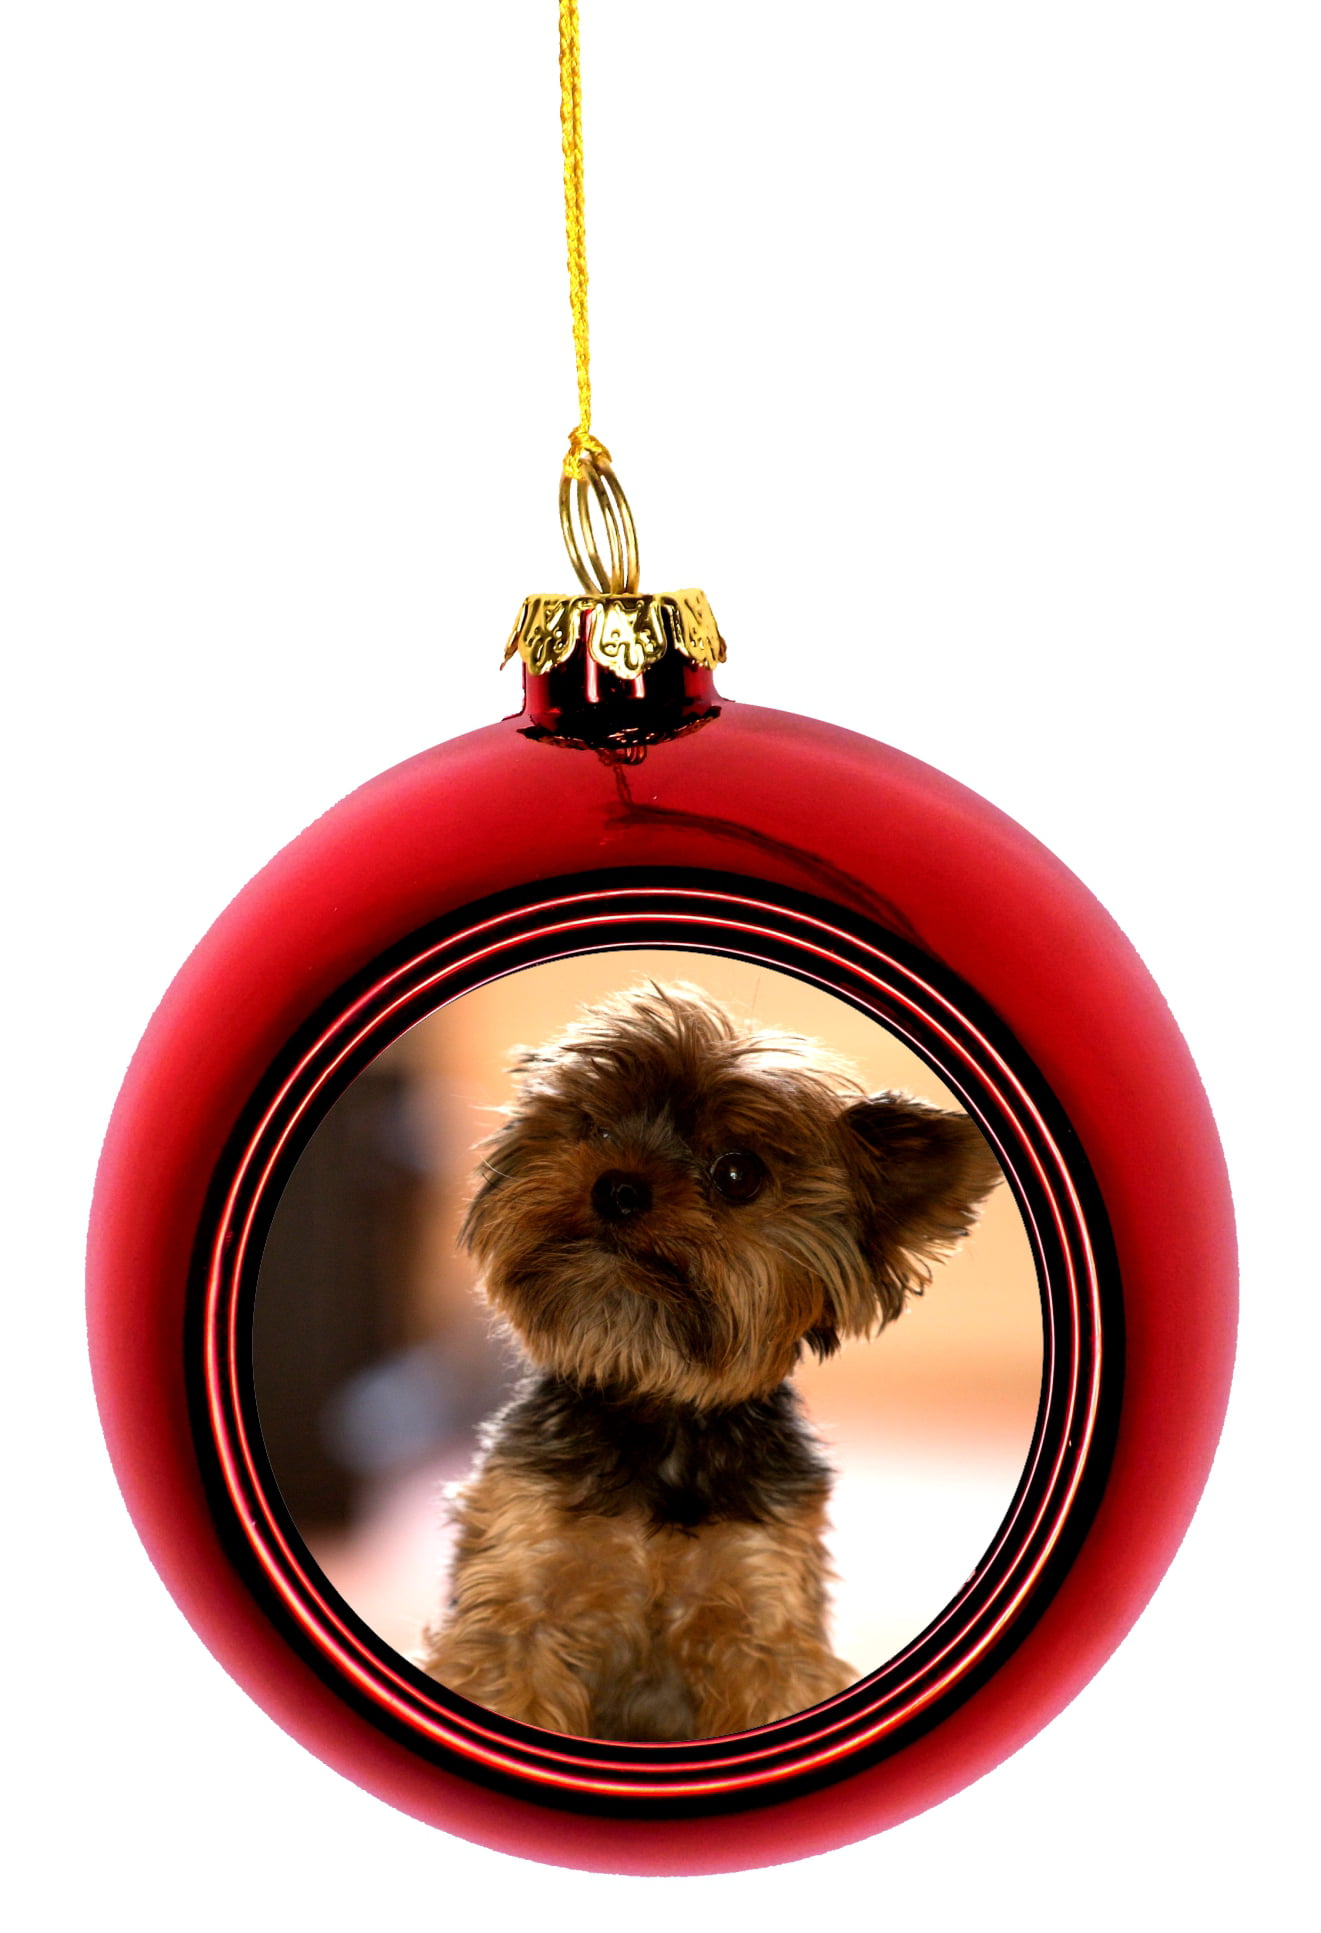 Ornaments Yorkie Yorkshire Terrier Puppy Dog Bauble Christmas Ornaments Red  Bauble Tree Xmas Balls - Walmart.com